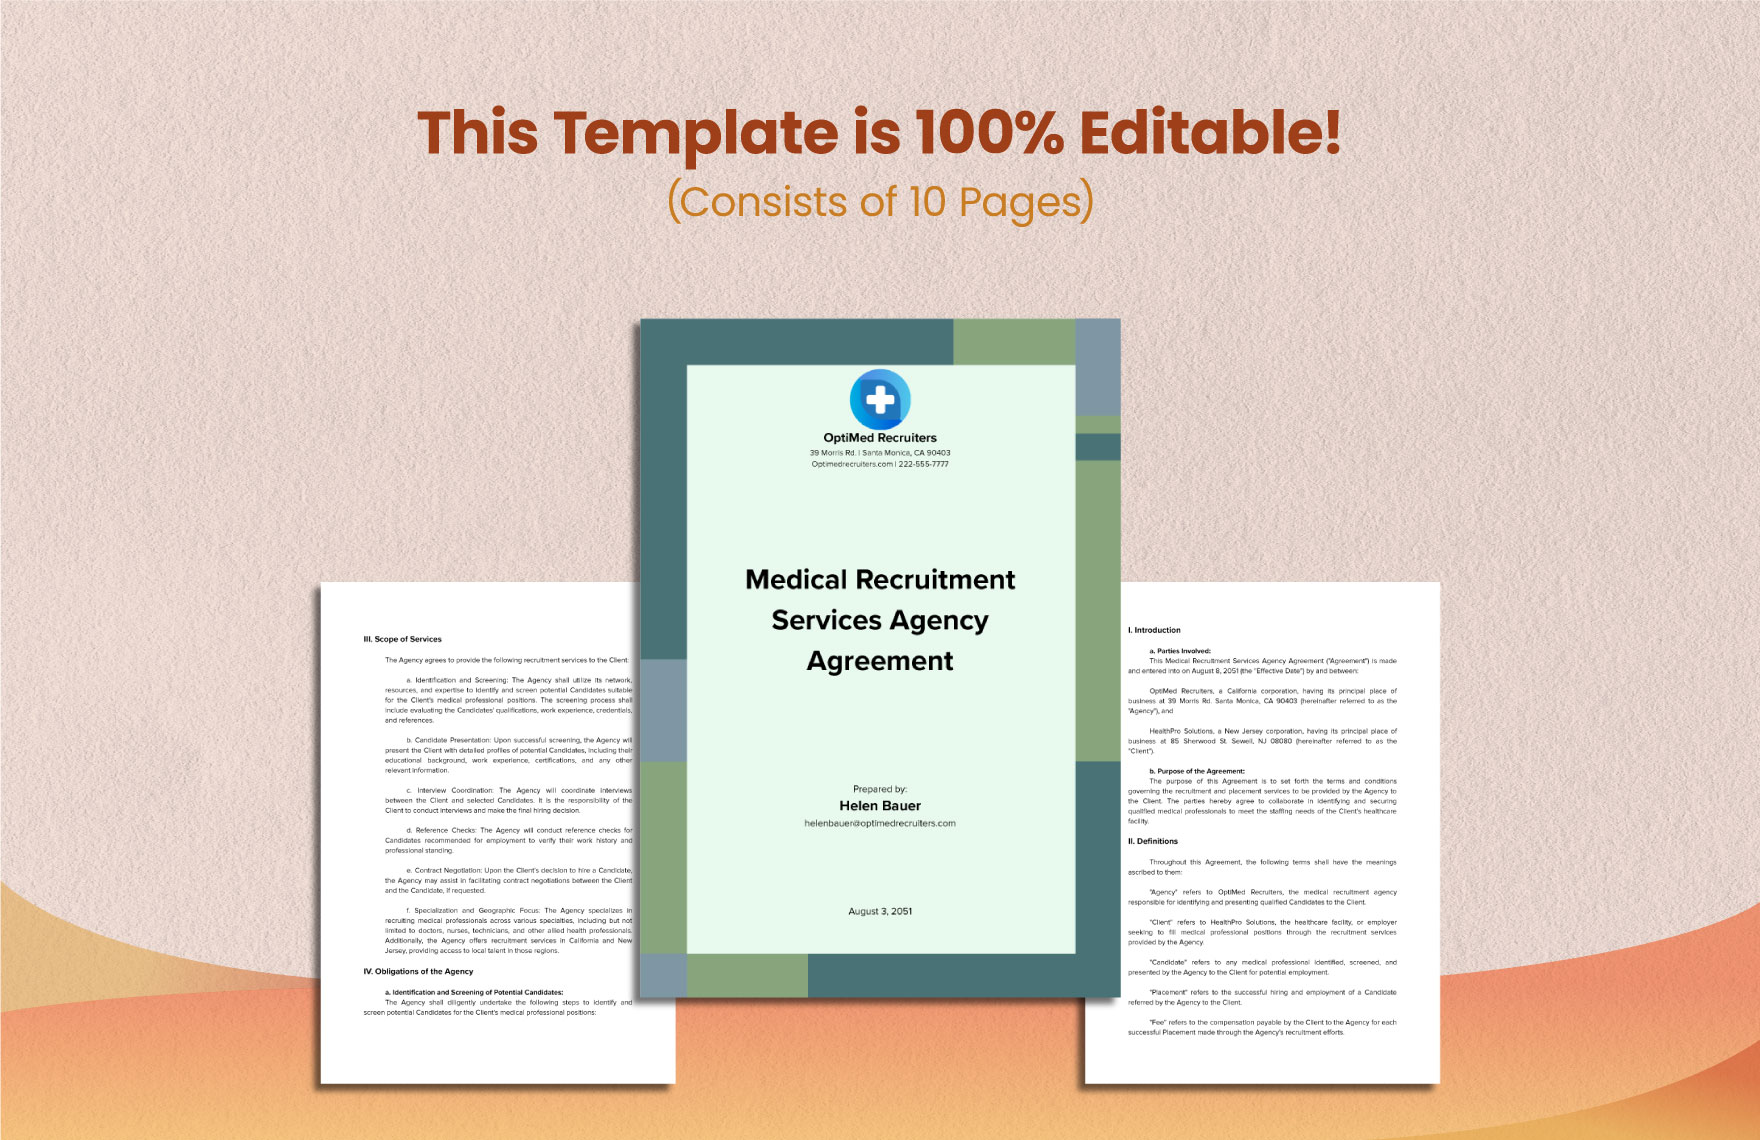 Medical Recruitment Services Agency Agreement